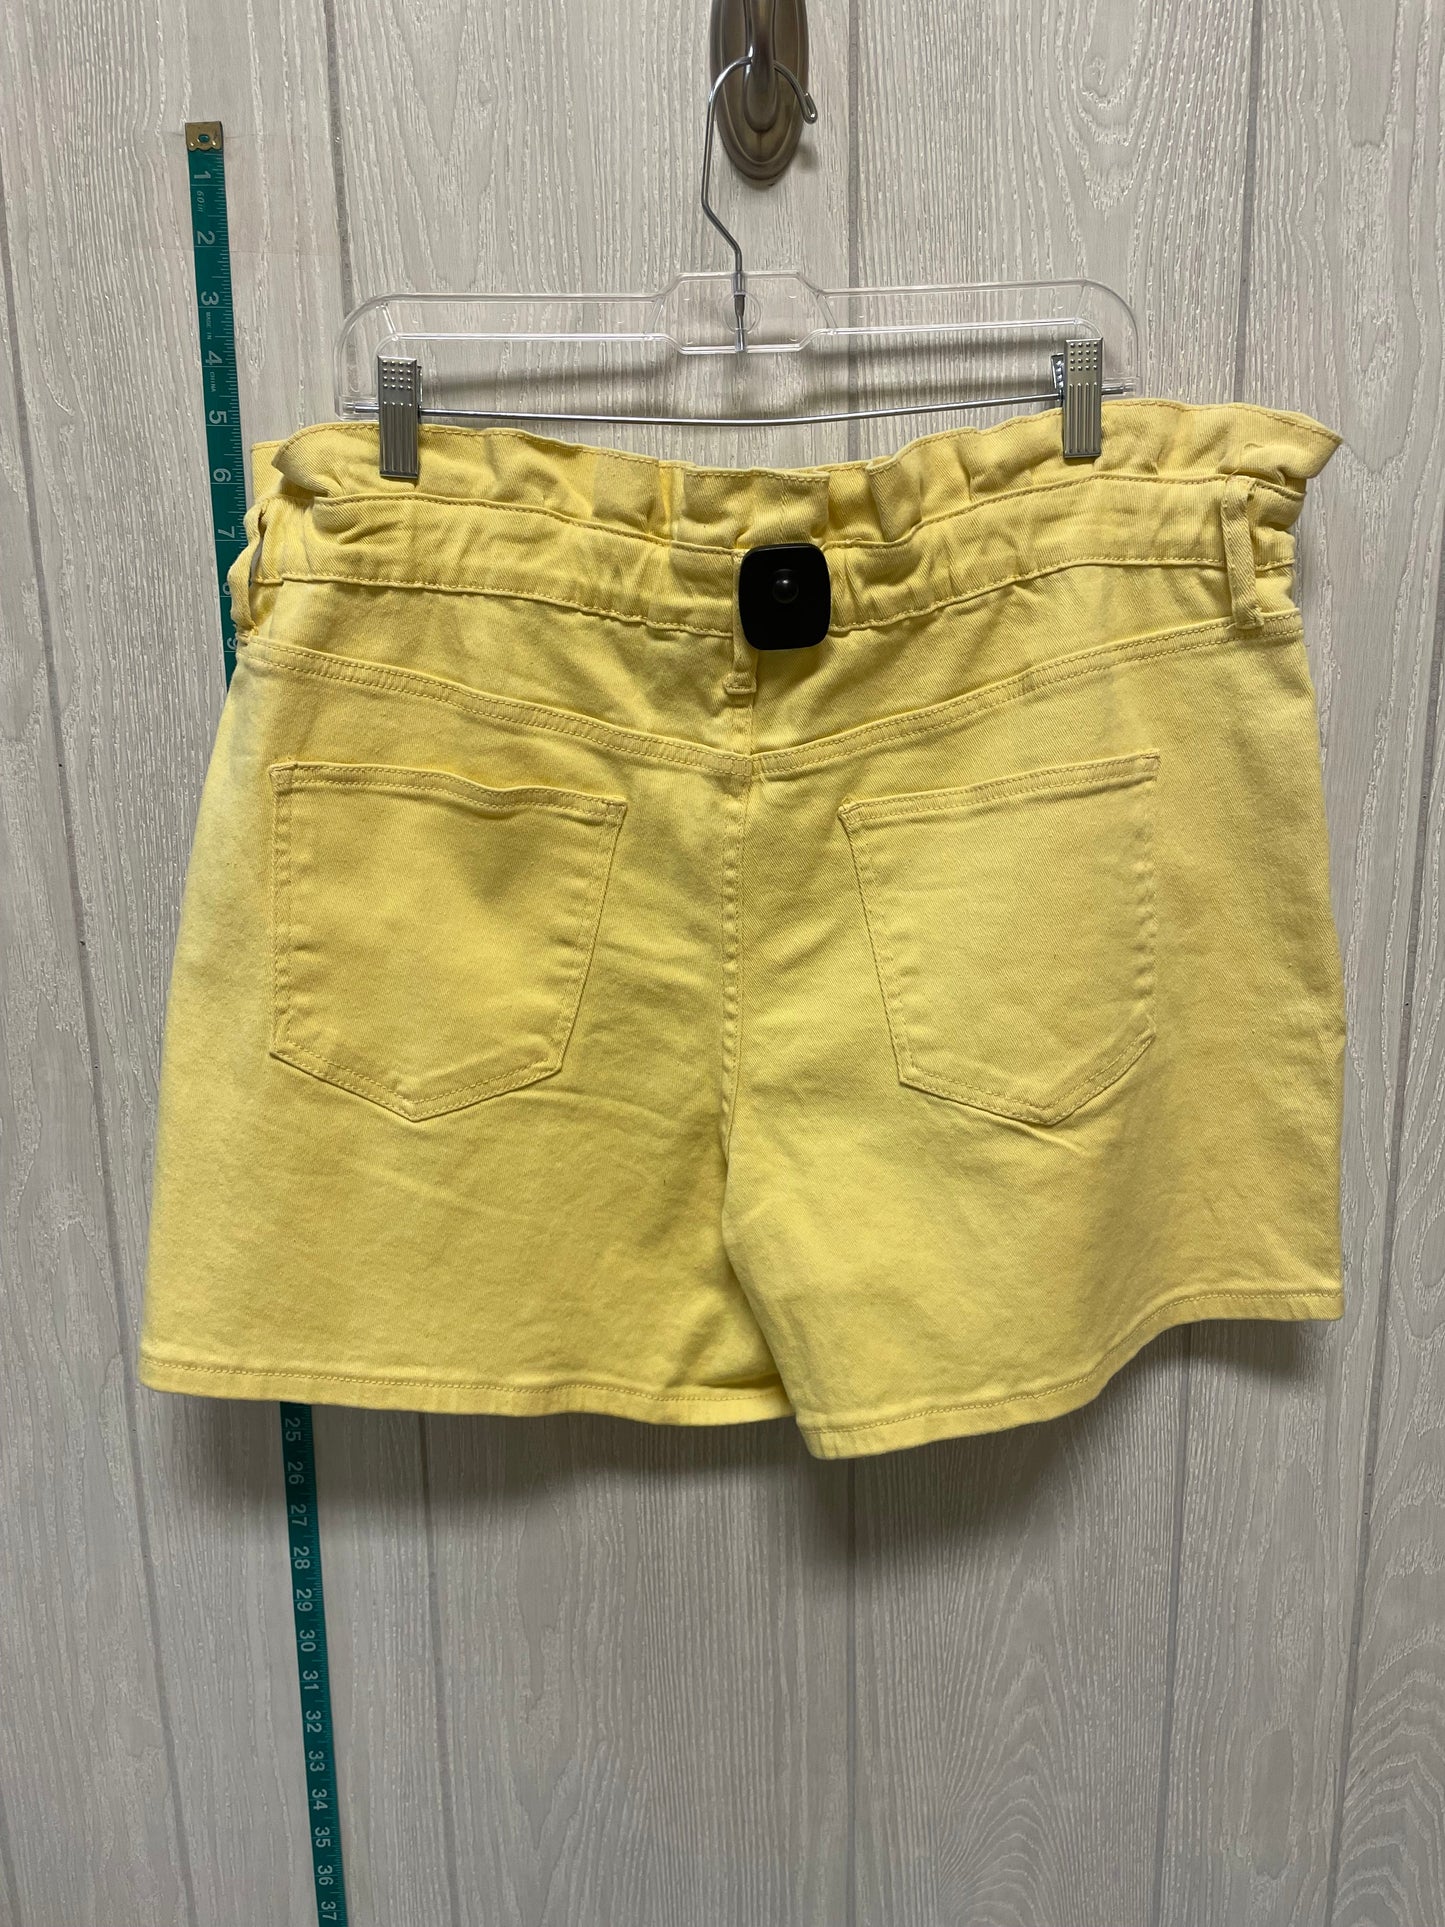 Shorts By New York And Co  Size: 18